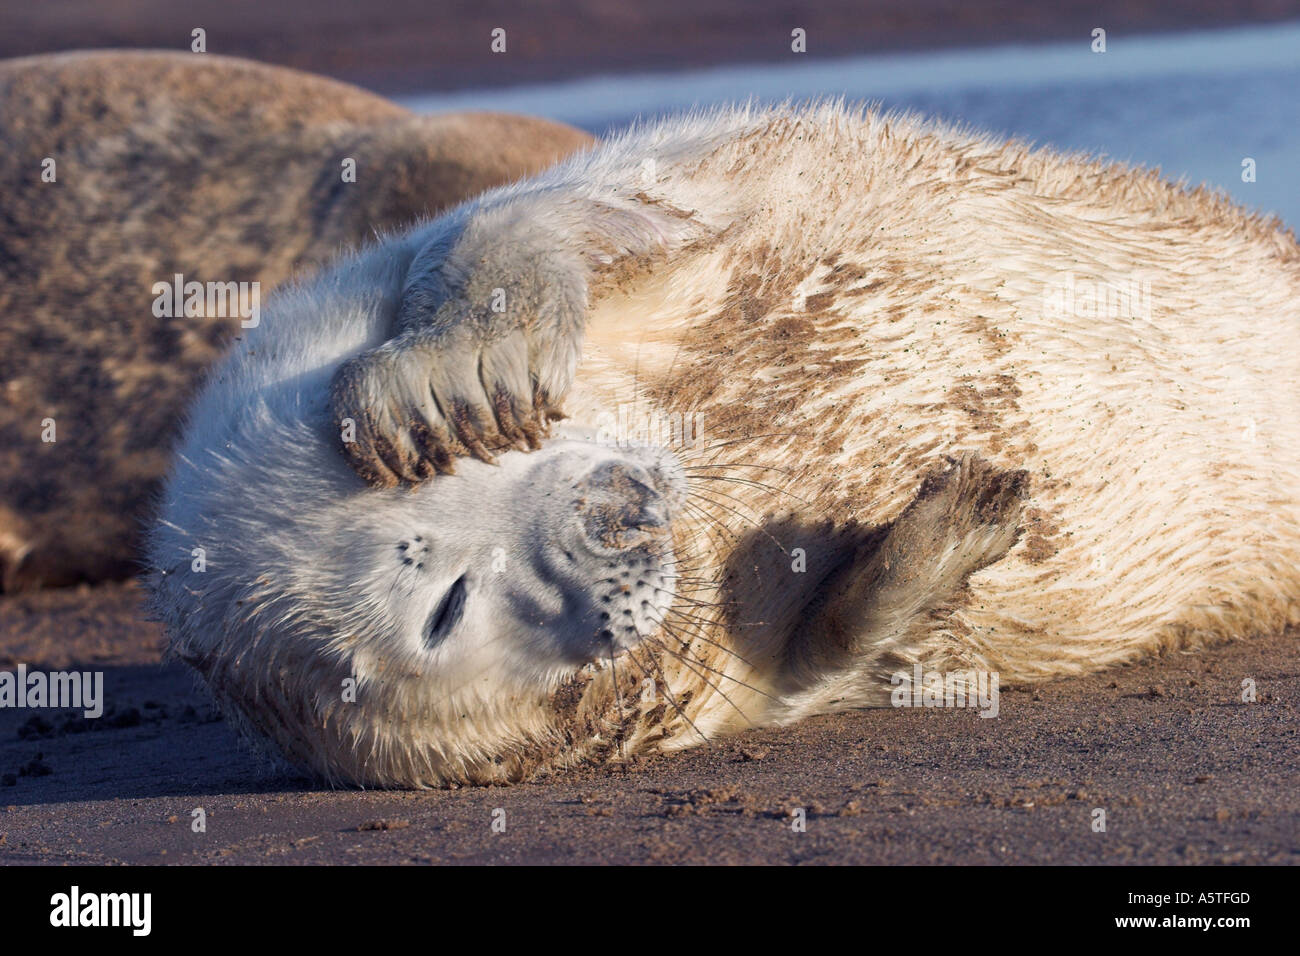 Grey seal pup with headache Stock Photo